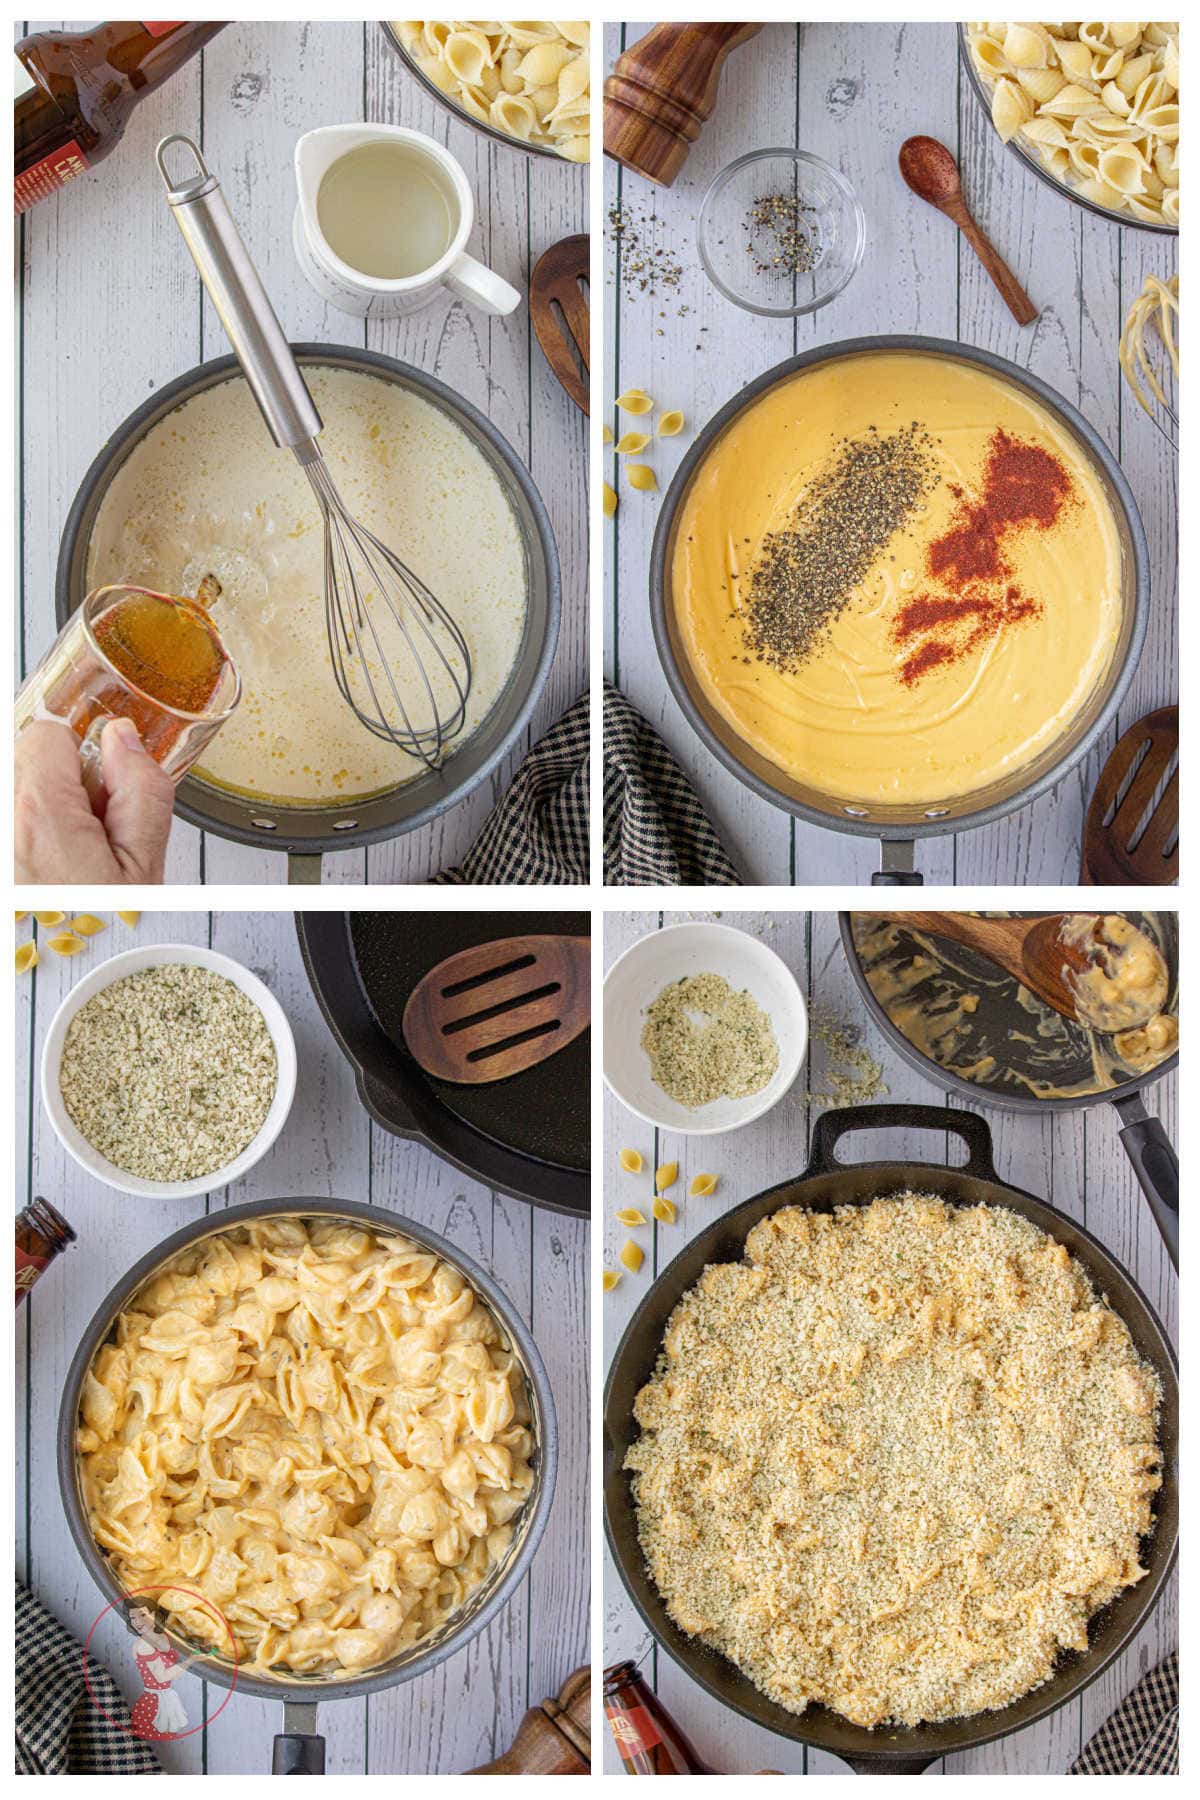 Step by step images showing how to make mac and cheese with beer.